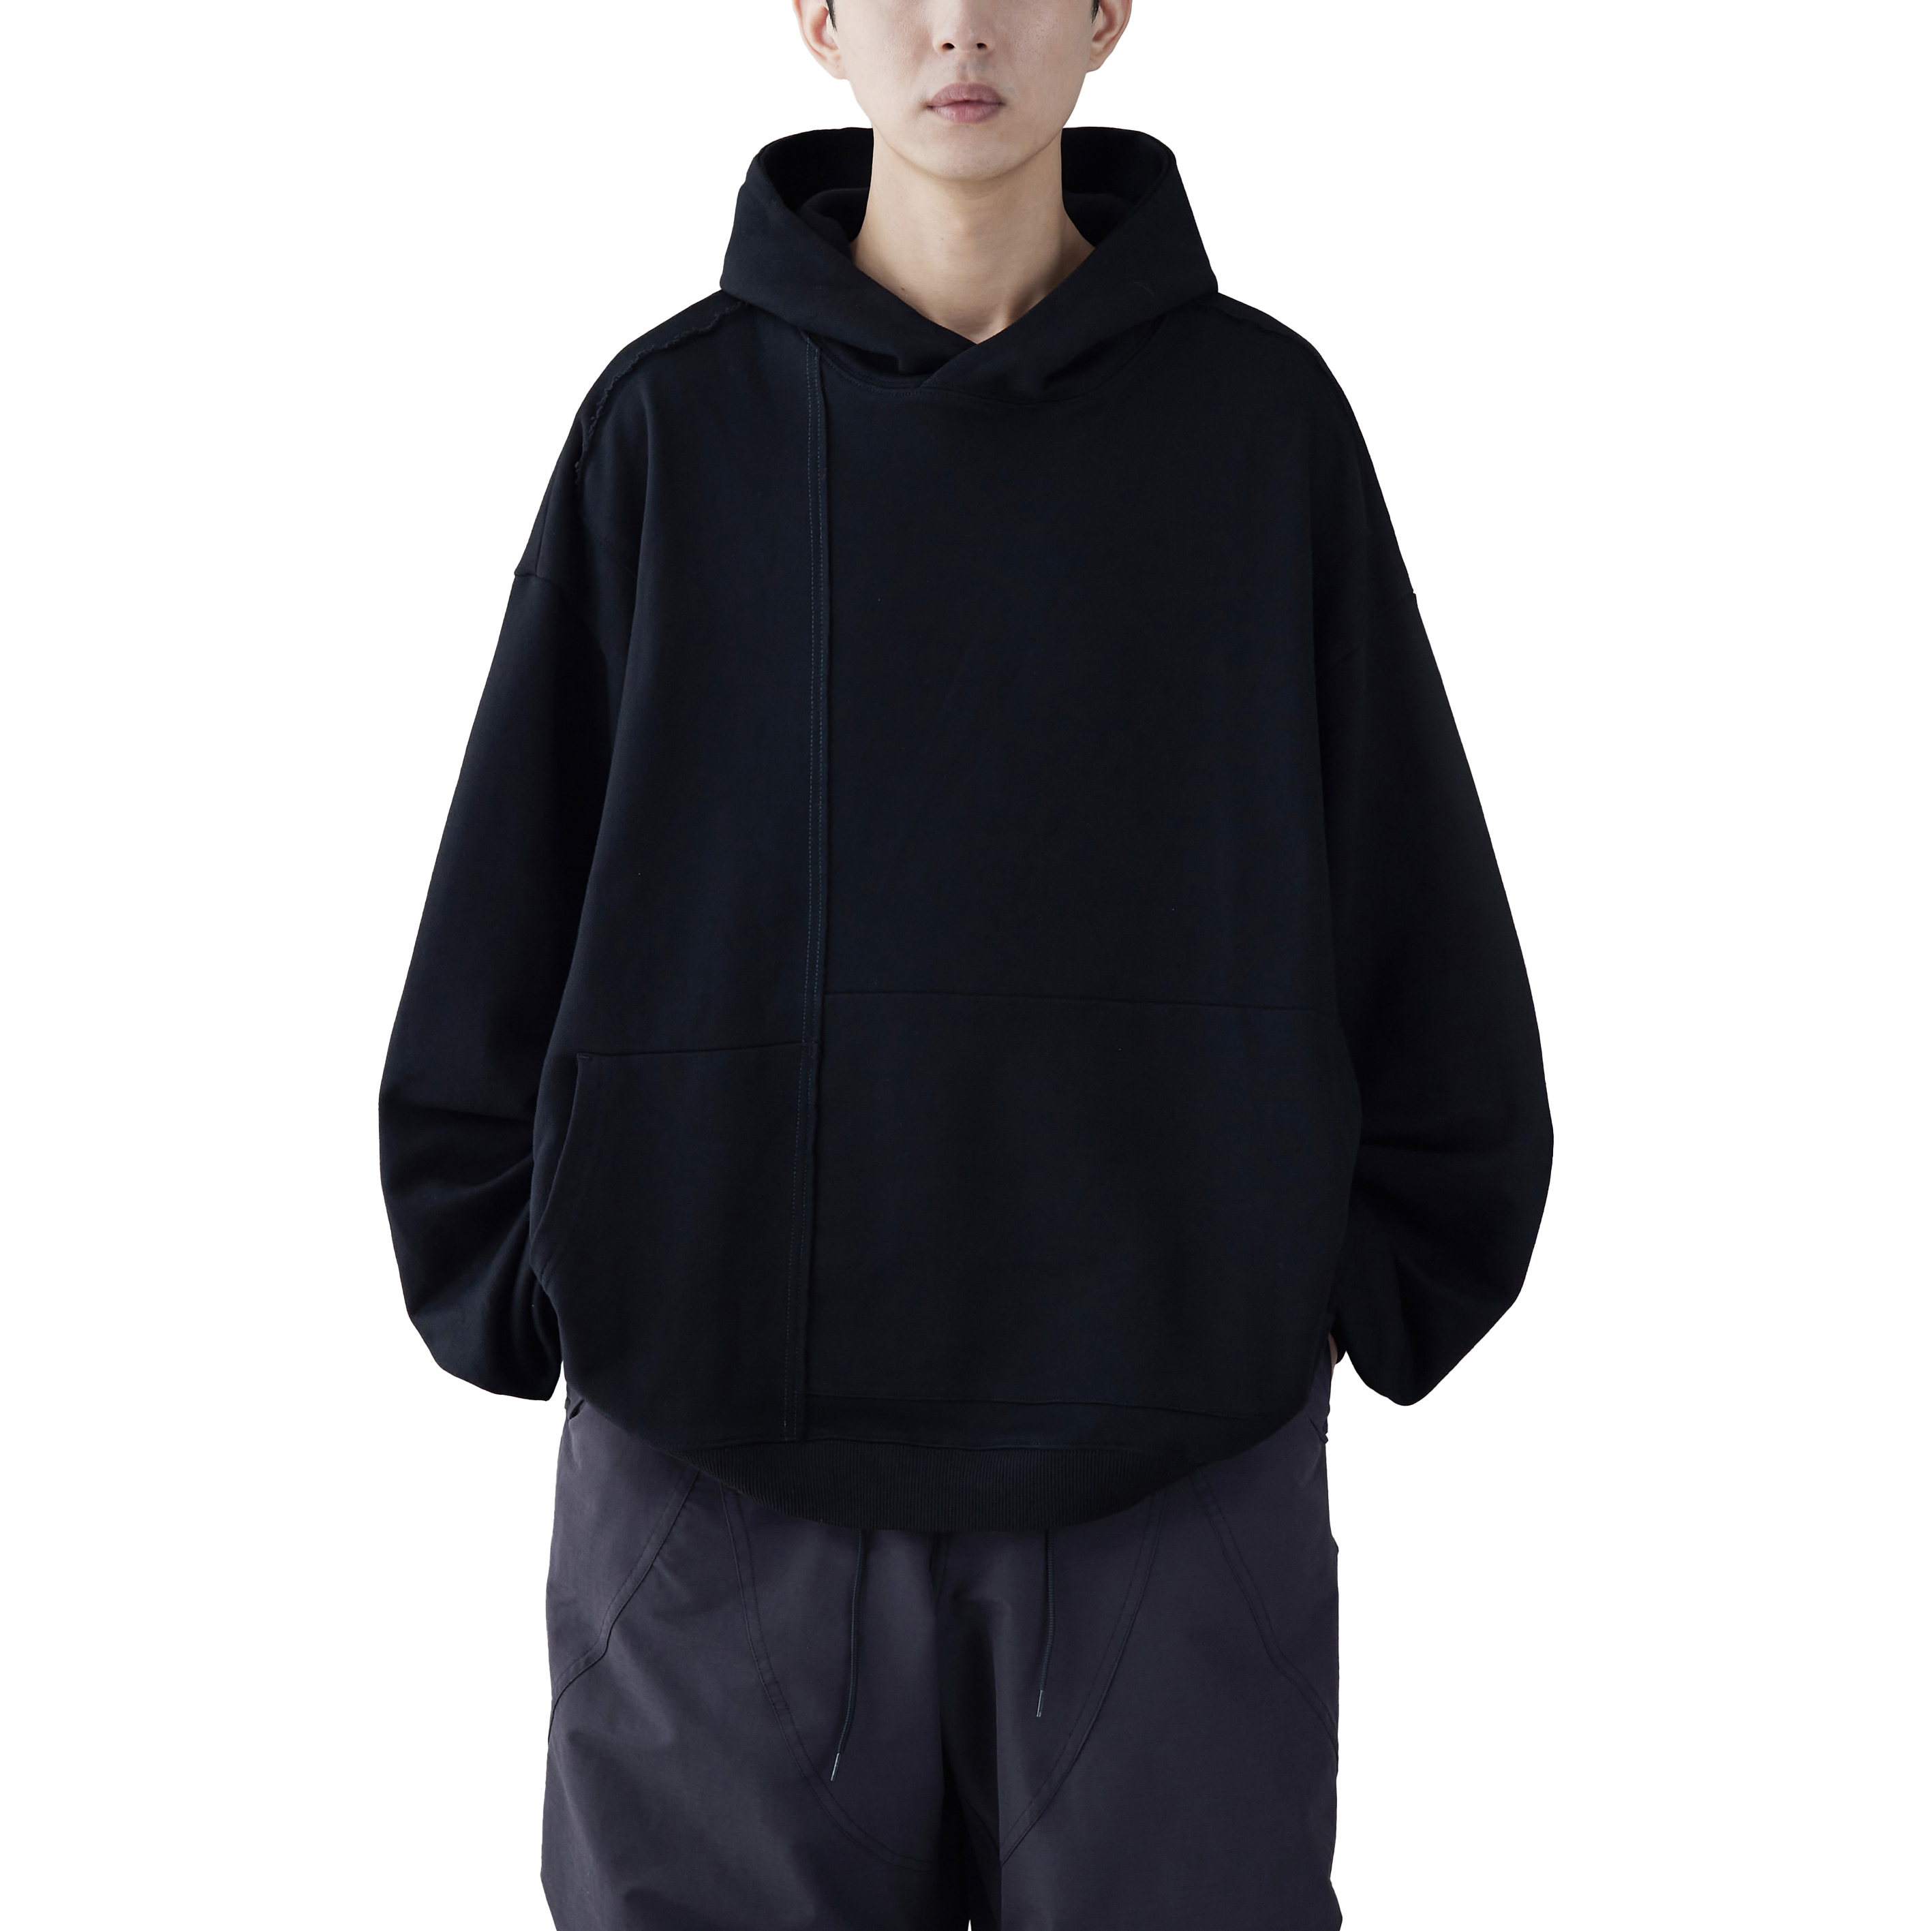 MELSIGN - Special Cutting Hoodie - Black